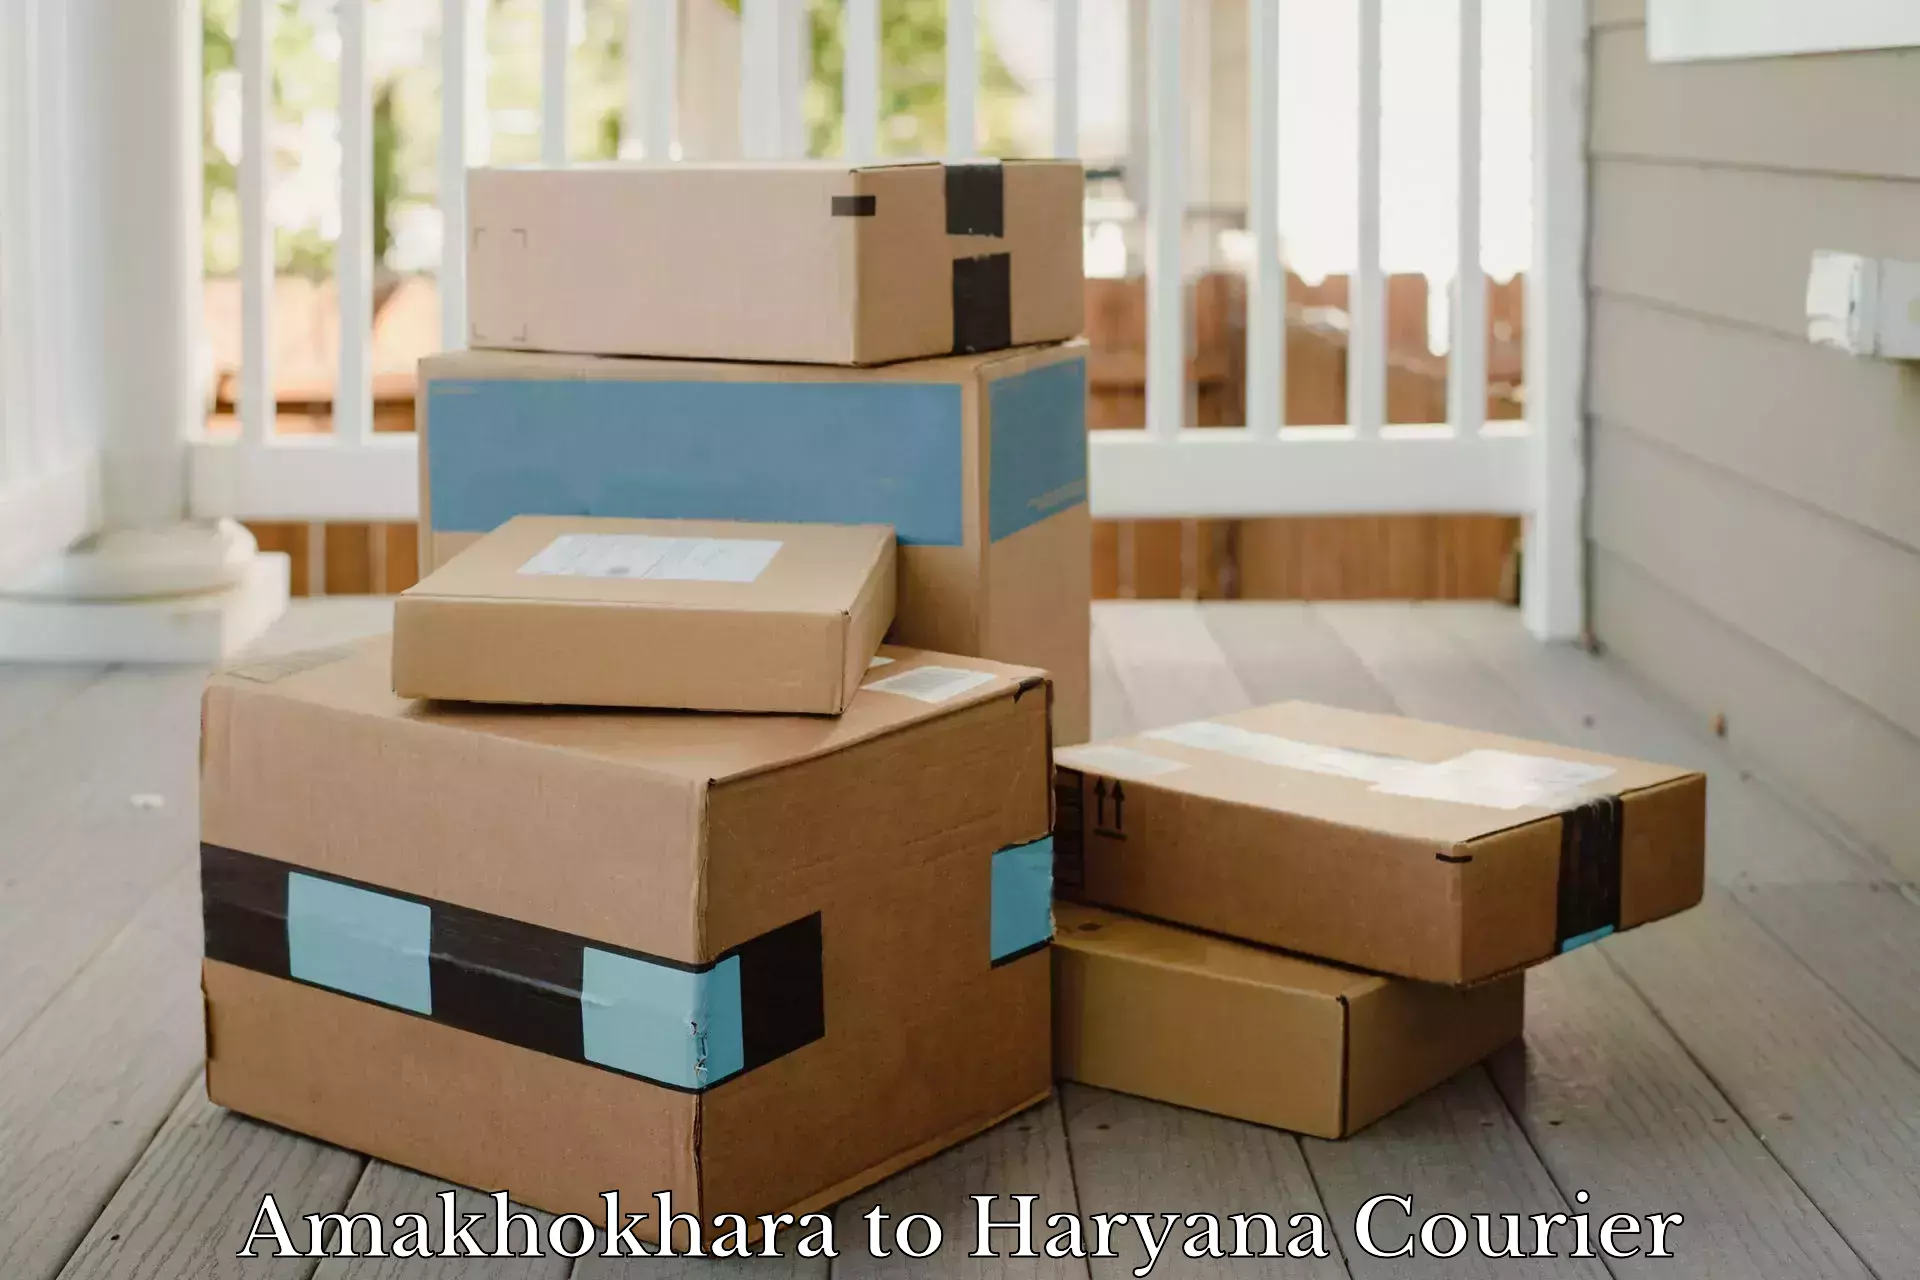 Package delivery network Amakhokhara to Taraori